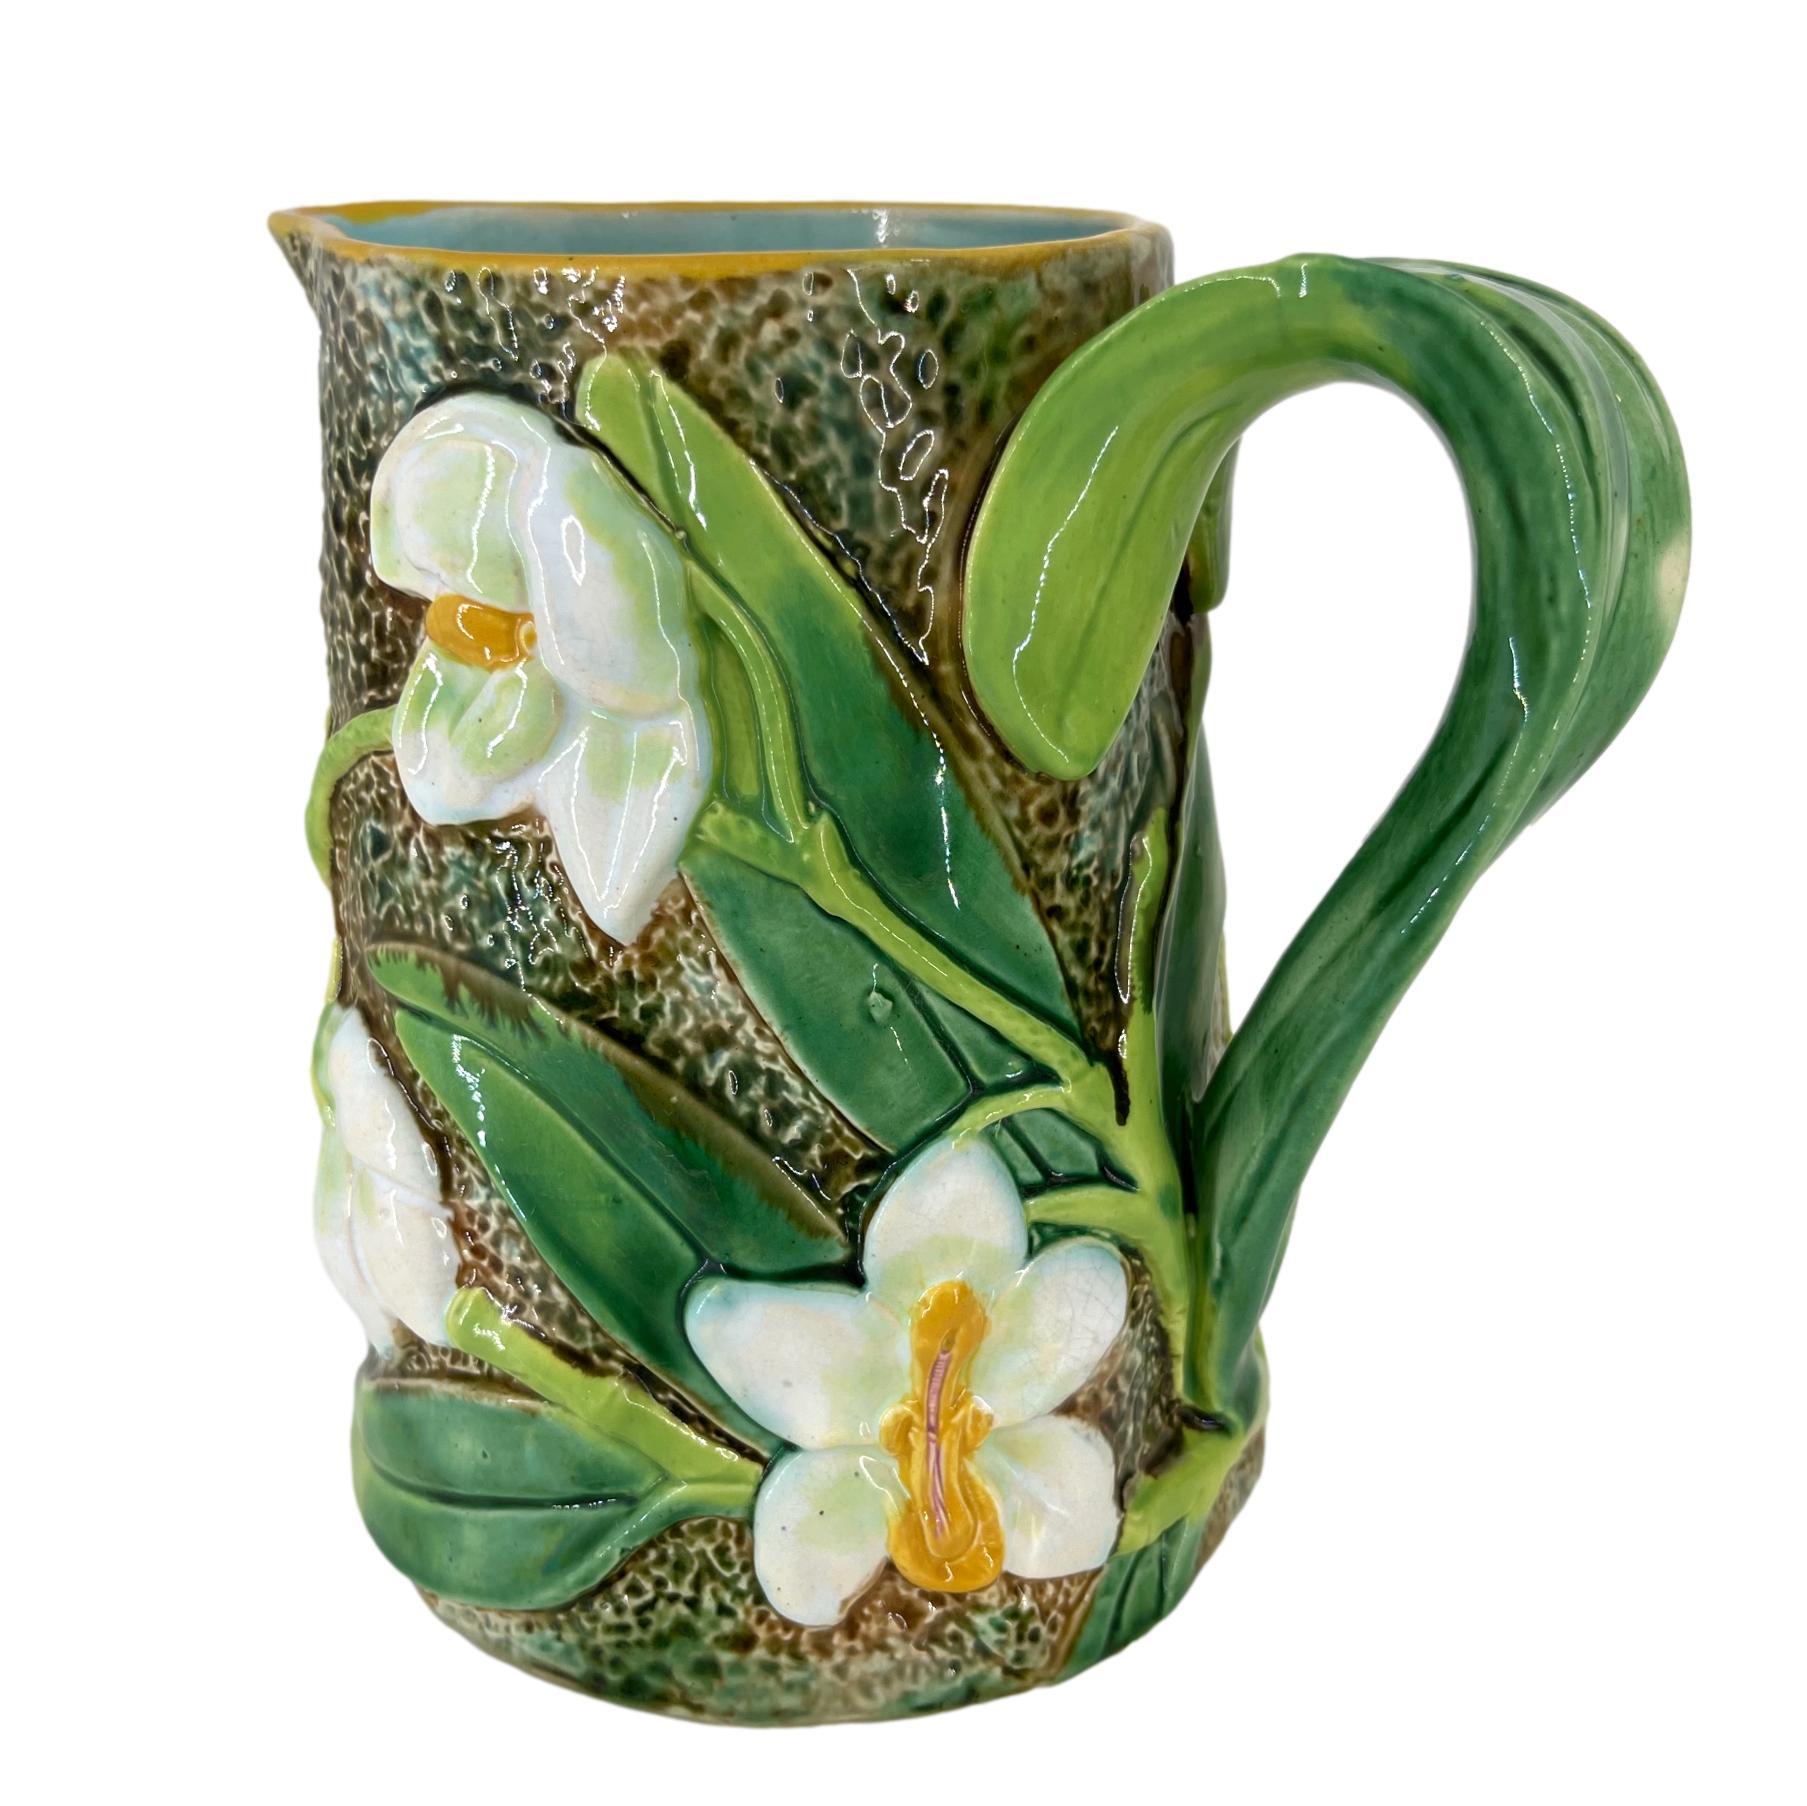 Molded George Jones Majolica Pitcher with Trompe L'oeil White Orchids, English, c. 1875